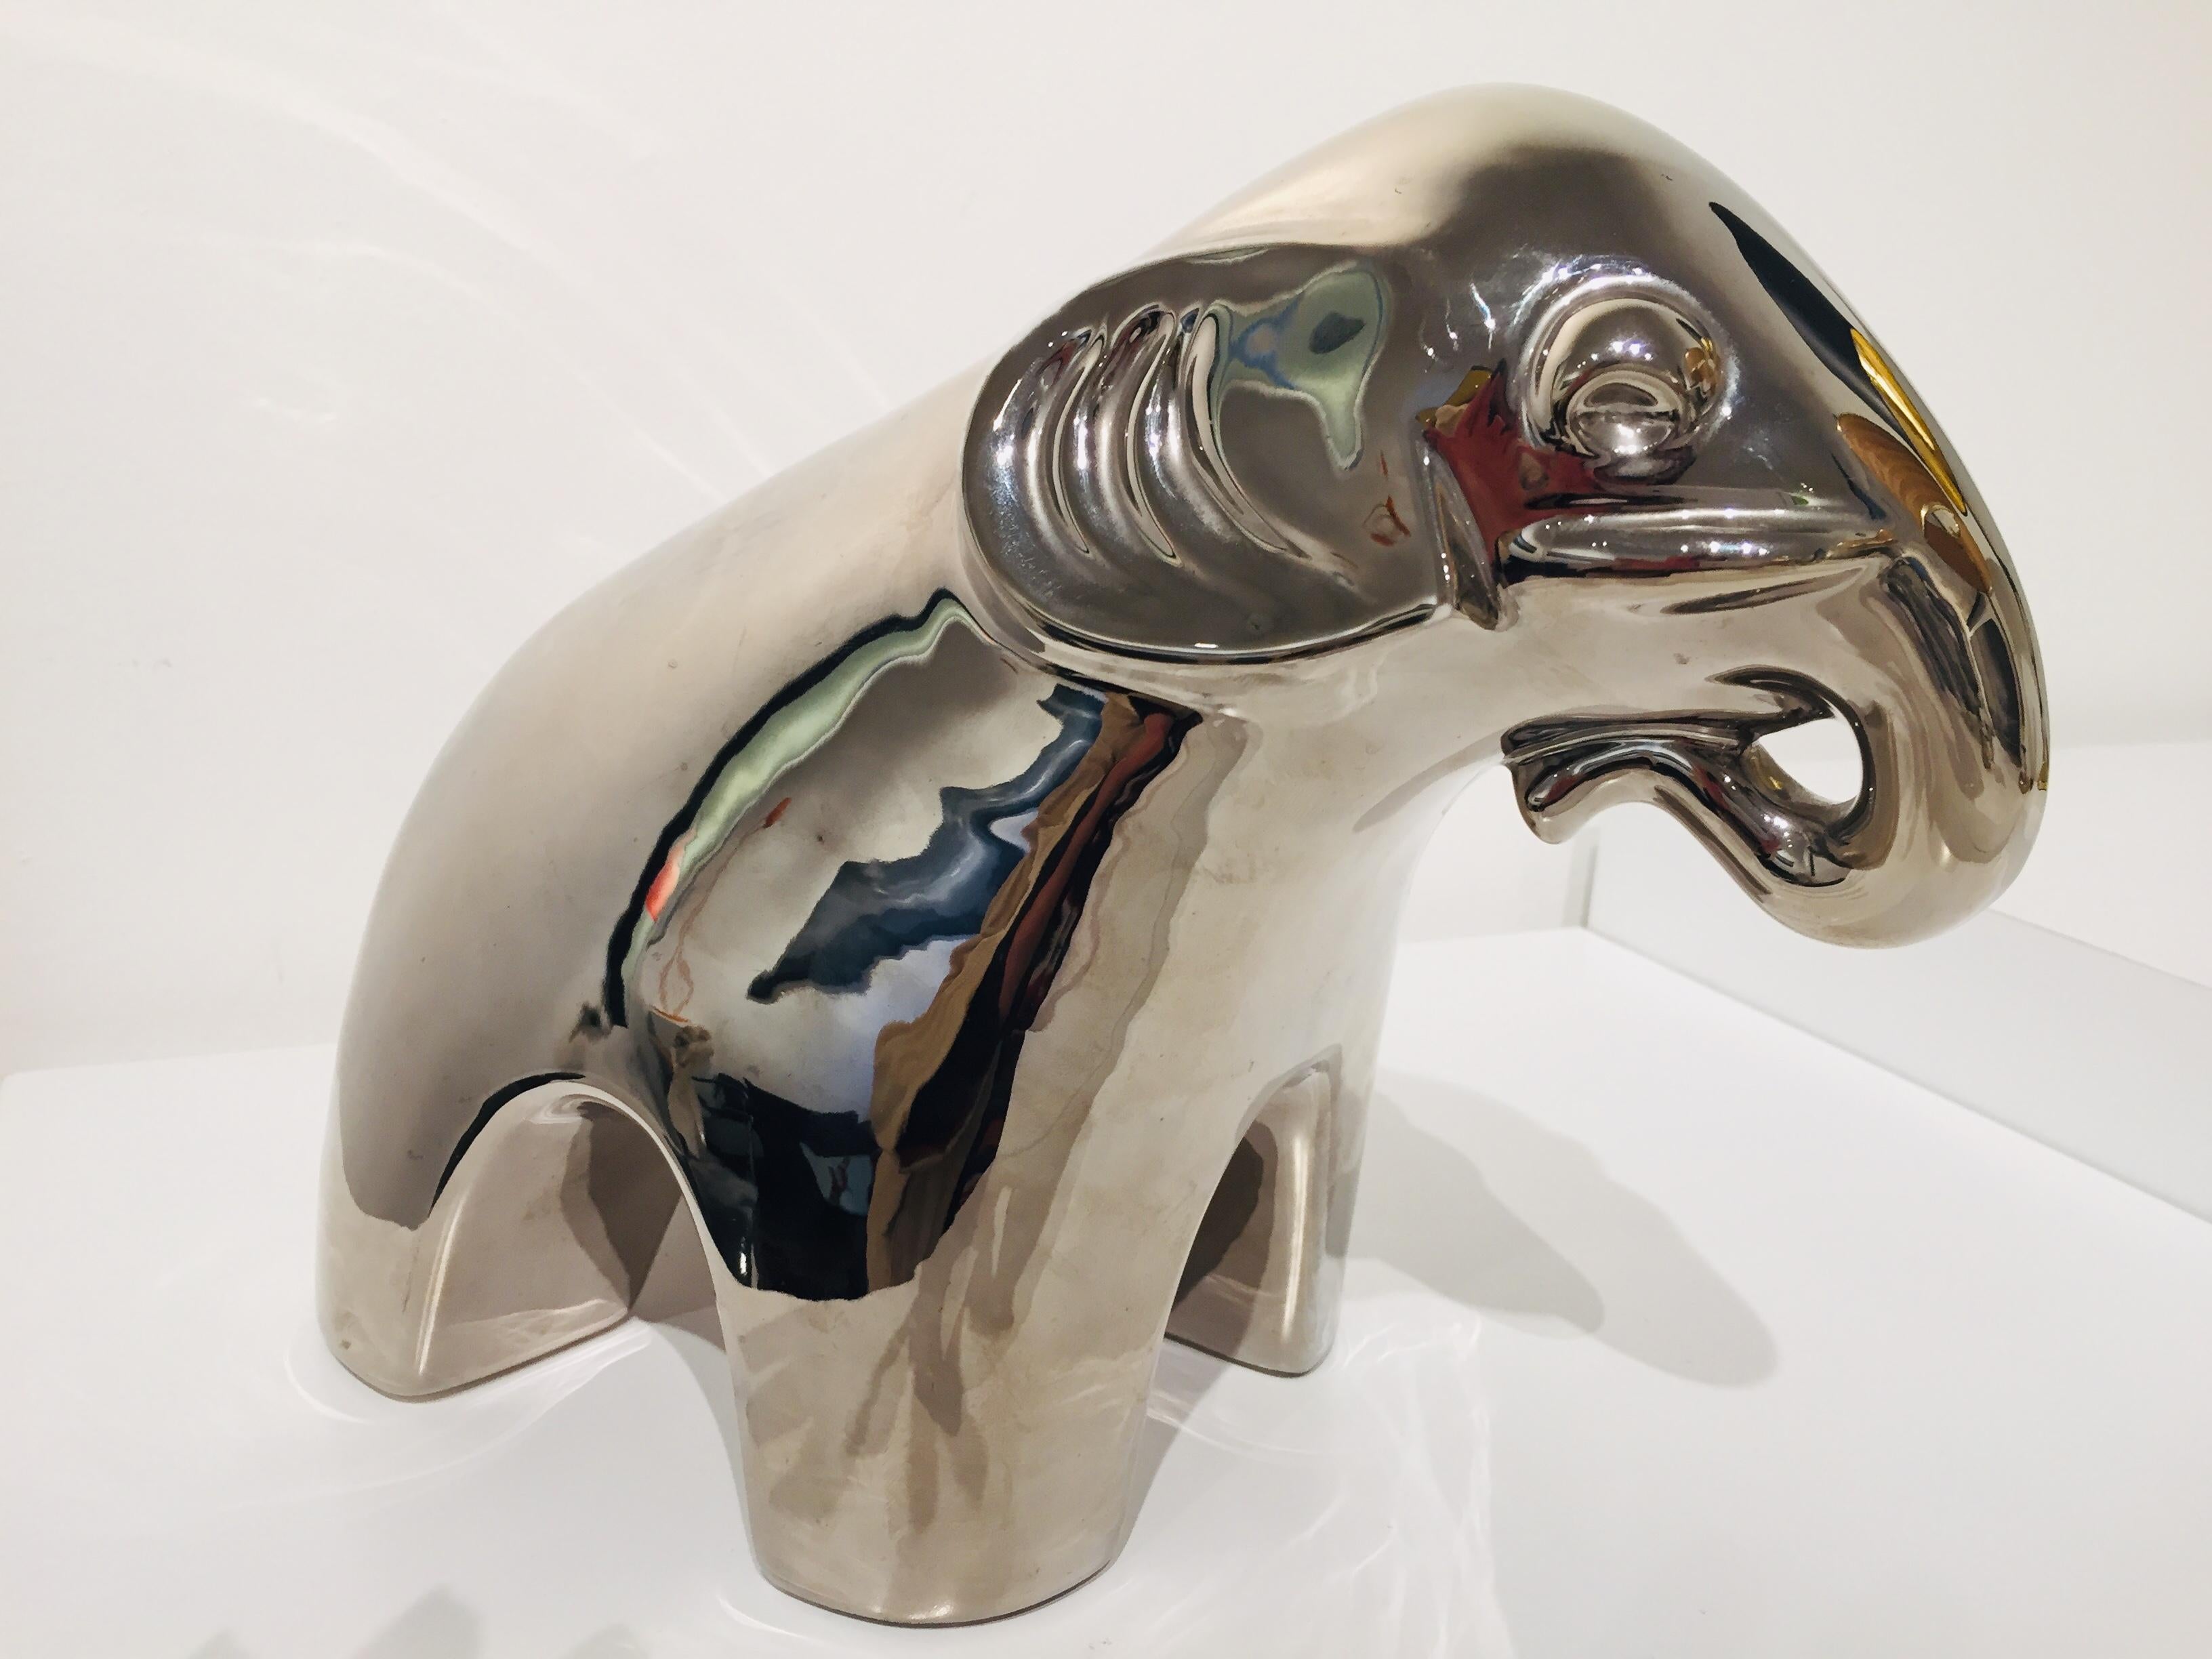 Contemporary ceramic elephant with mirror finish. Color varies slightly depending on the light. Some wear is lightly visible on both ears.